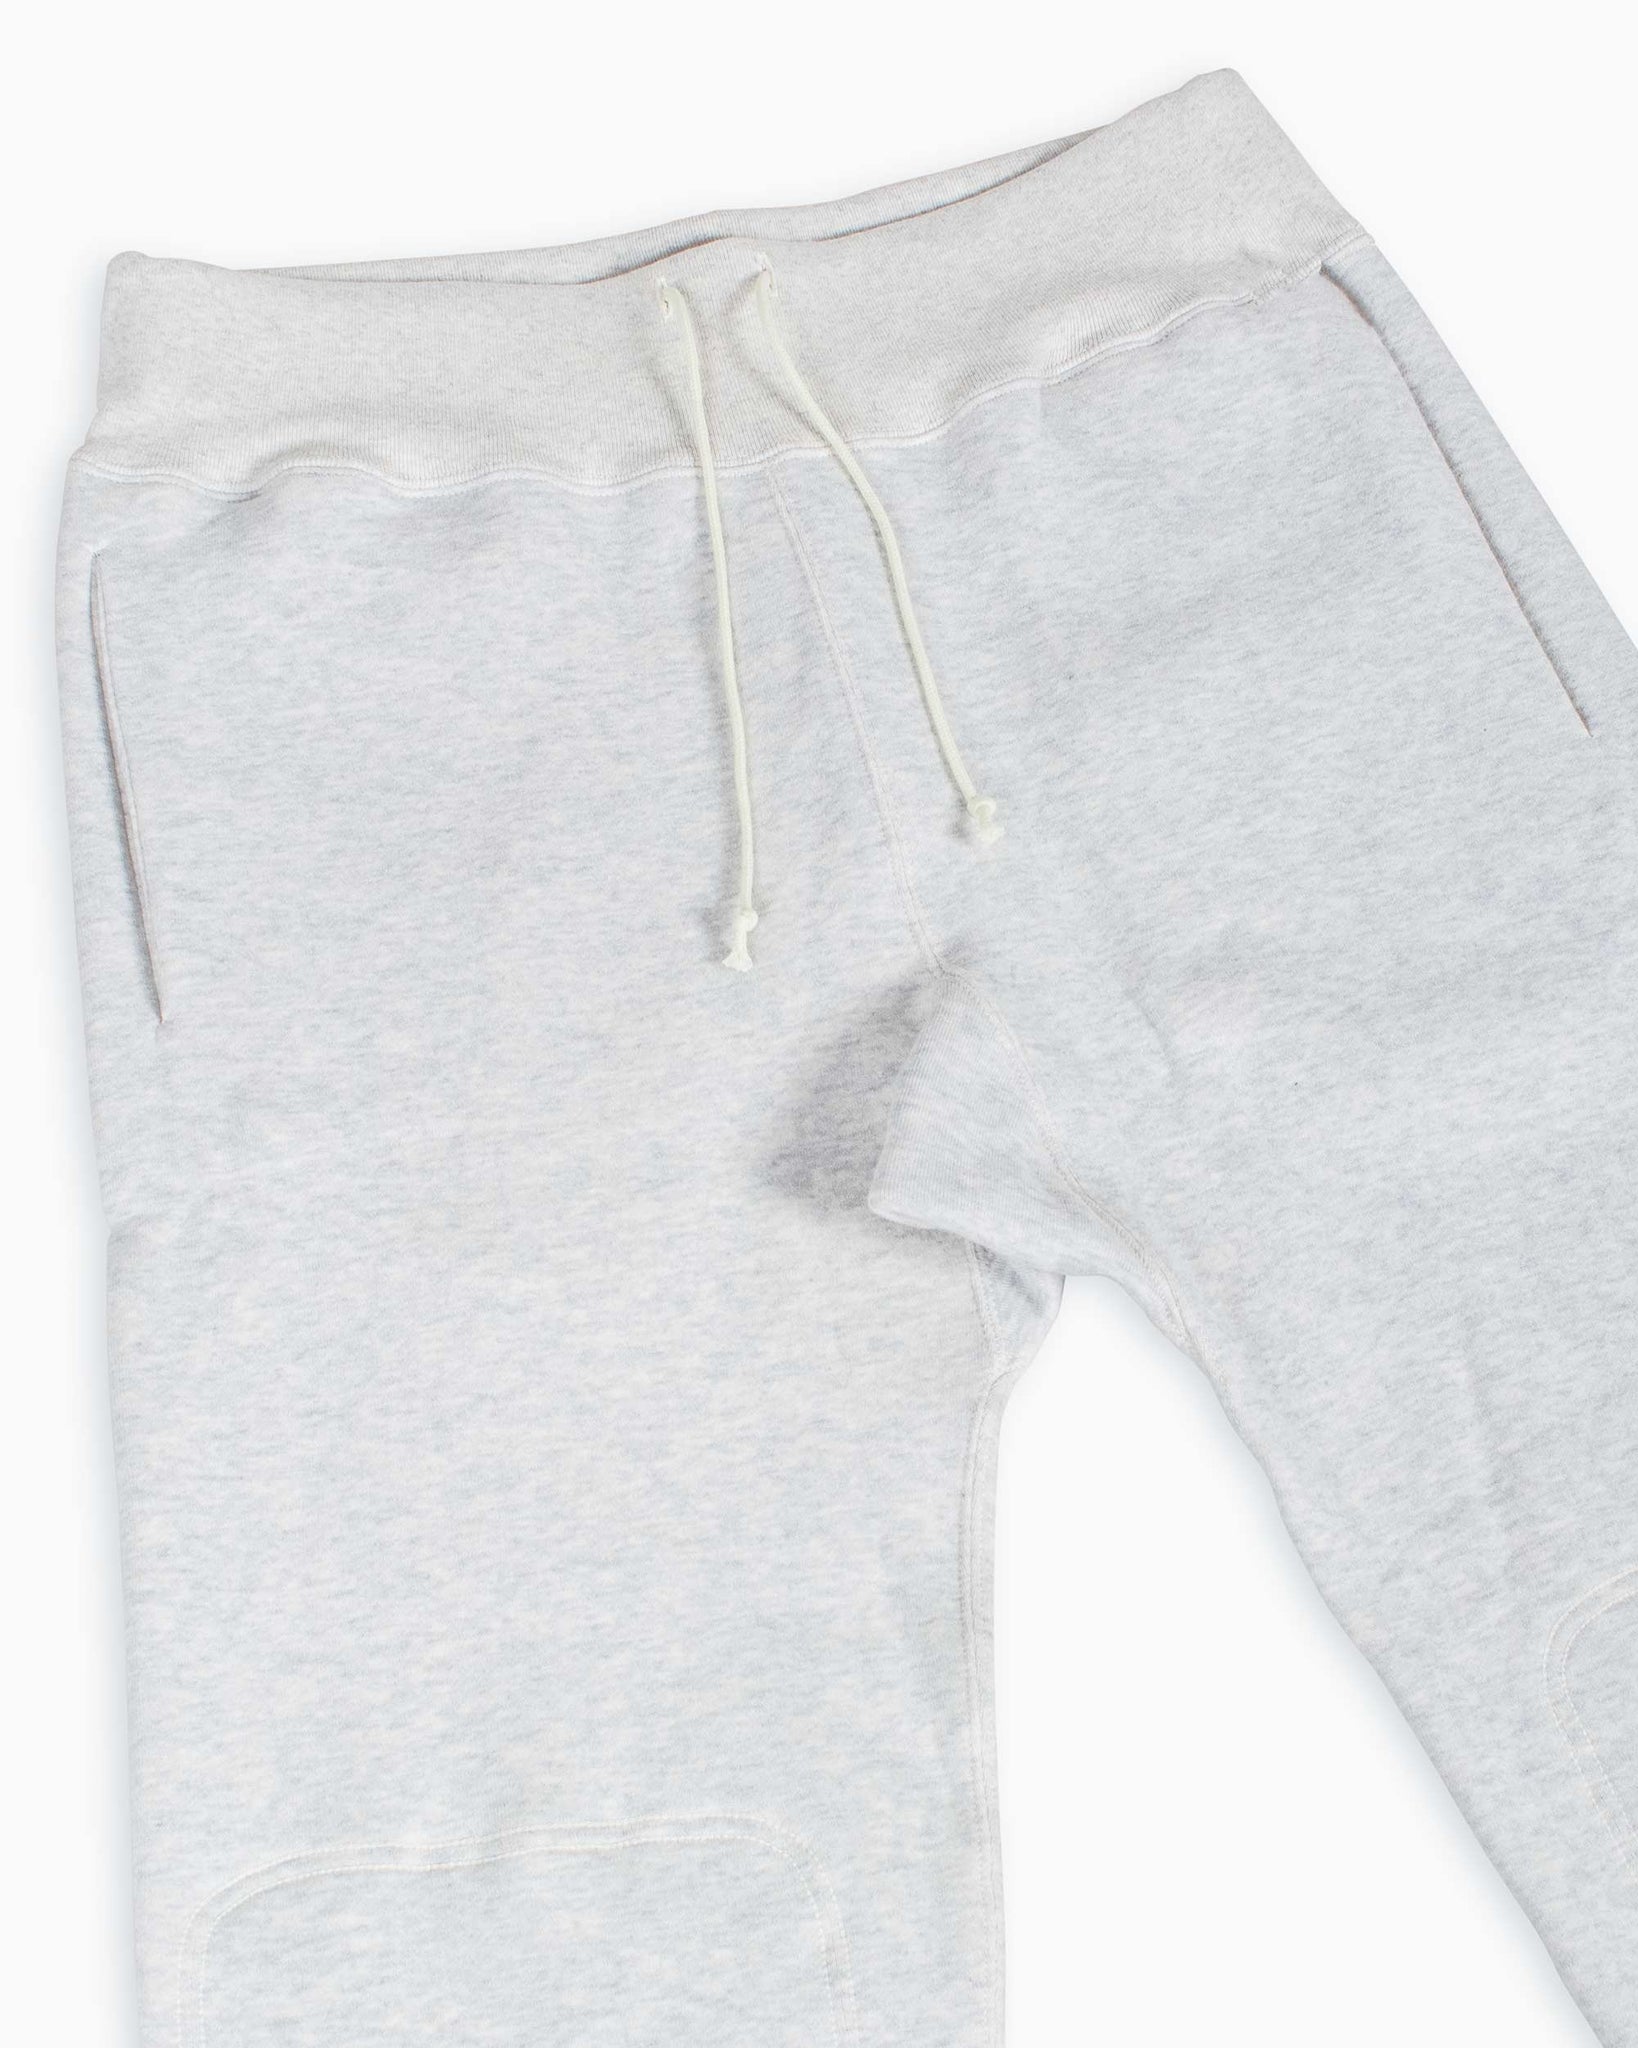 Bottoms – Tagged Sweatpants – The Real McCoy's